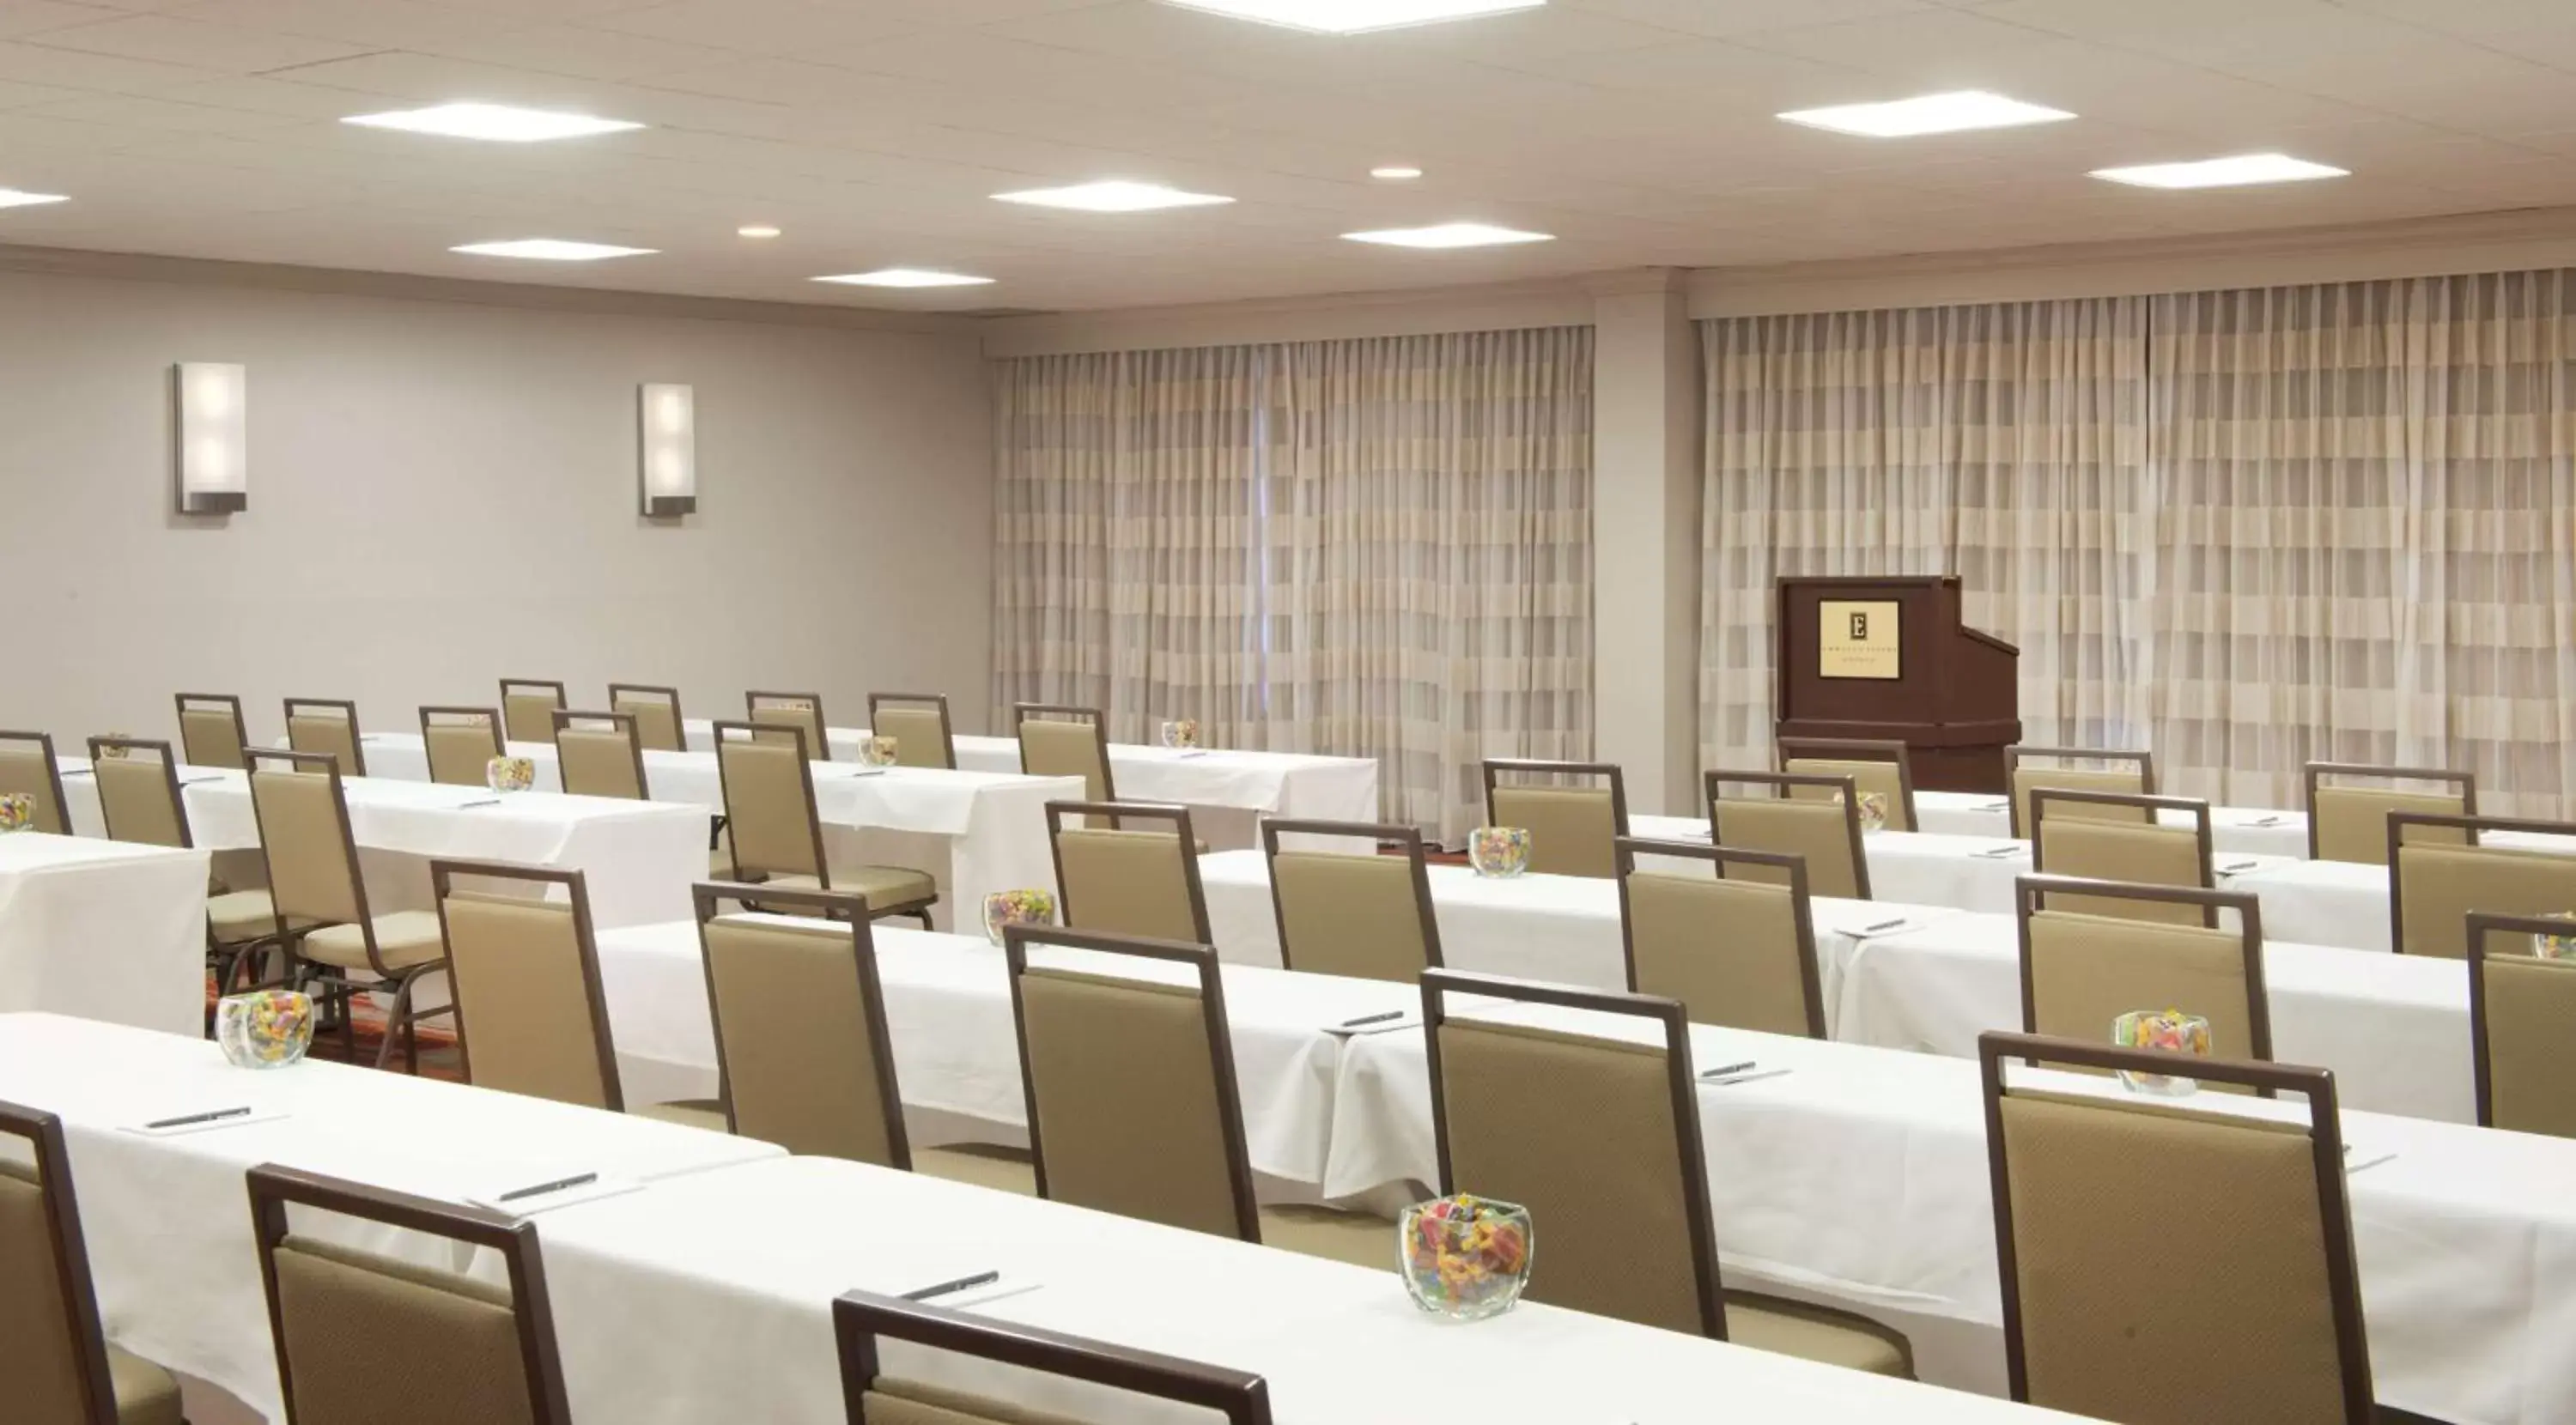 Meeting/conference room in Embassy Suites by Hilton Colorado Springs